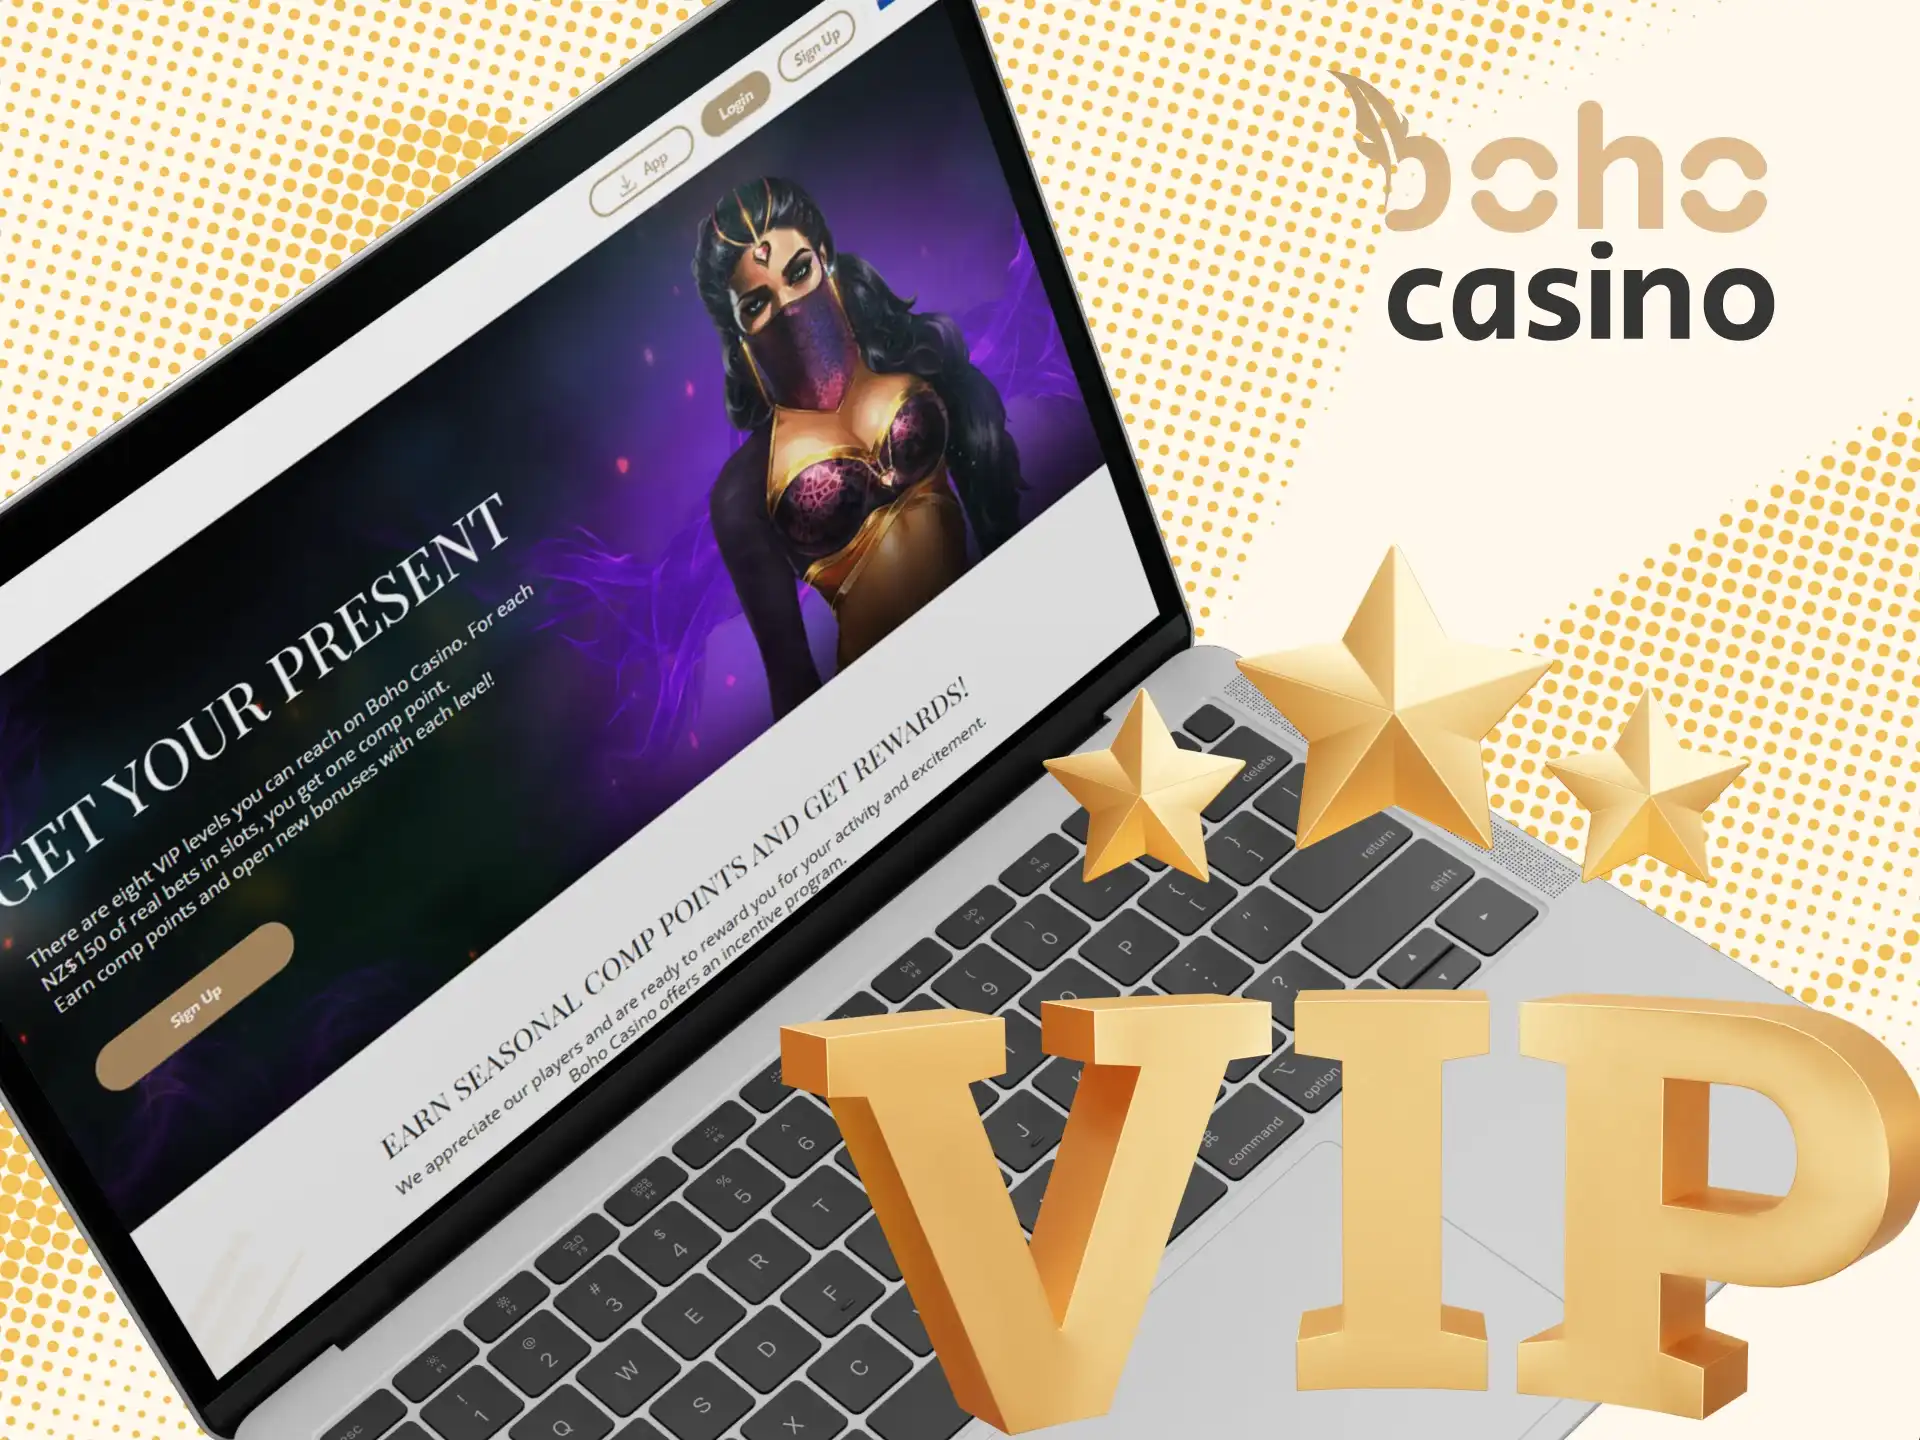 Find out what is the VIP club of the Boho online casino.